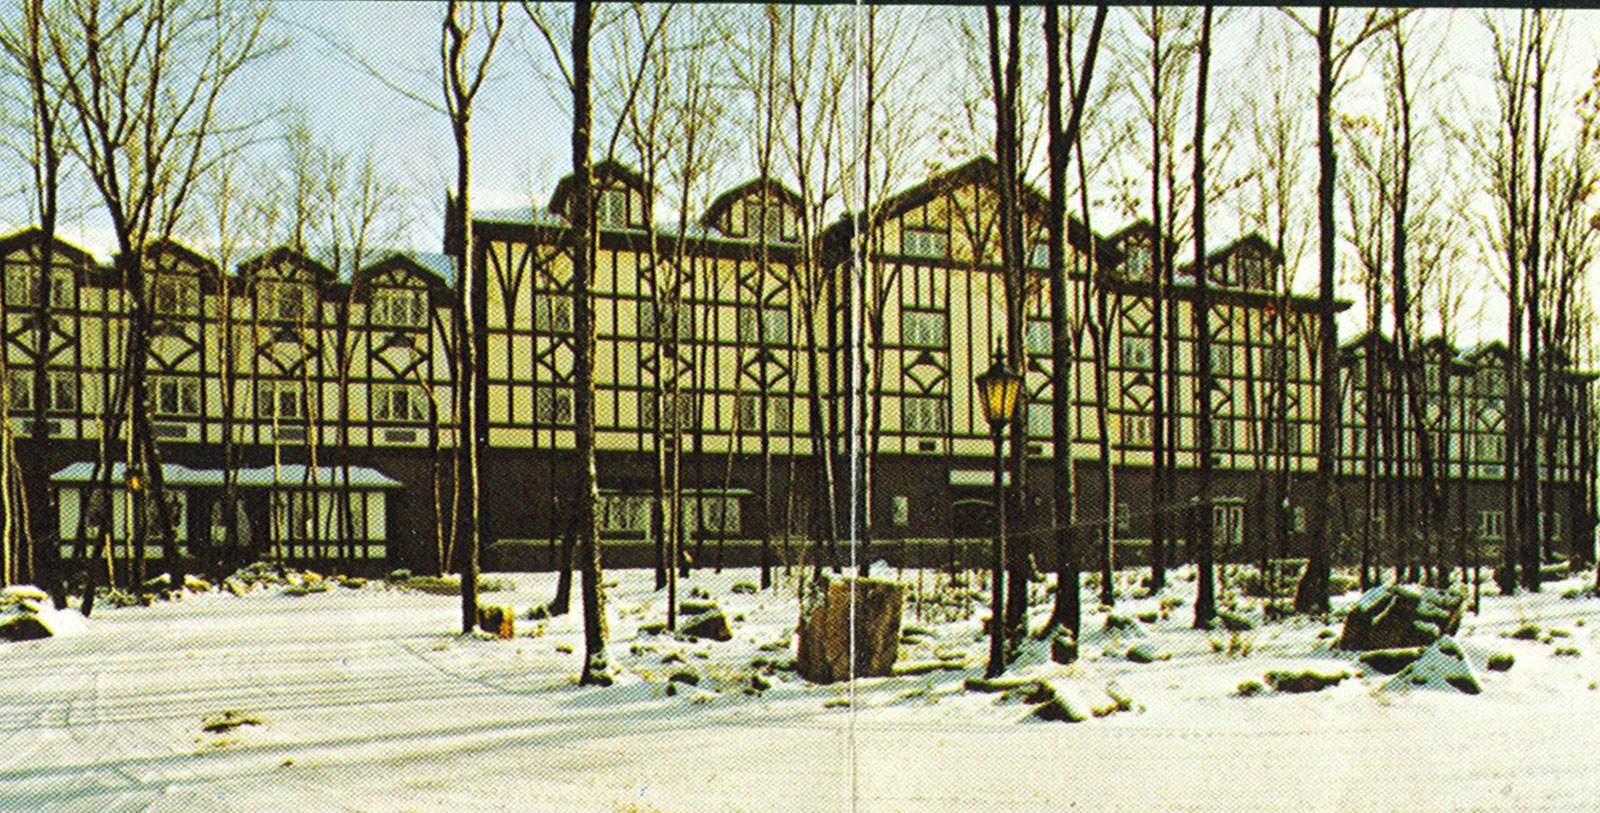 Image of Historic Hotel Exterior The Lodge at Nemacolin Woodlands Resort, 1968, Member of Historic Hotels of America, in Farmington, Pennsylvania, Discover